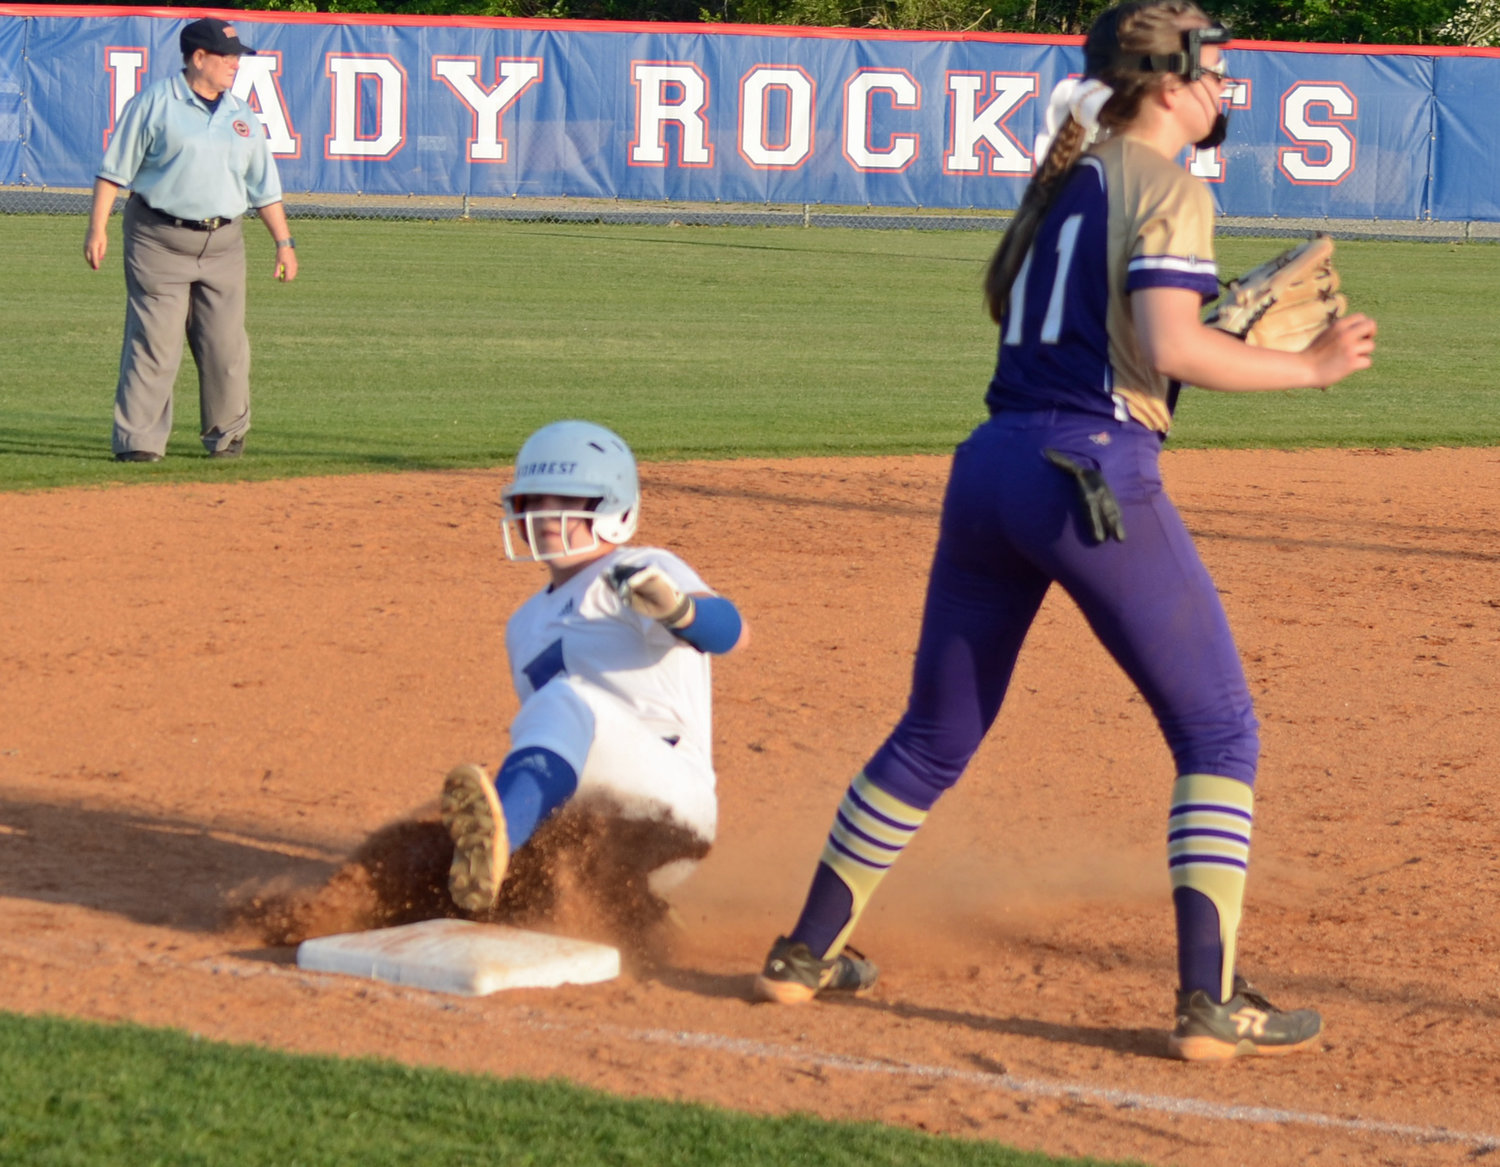 Christa Warren steals third base in the bottom of the second inning.